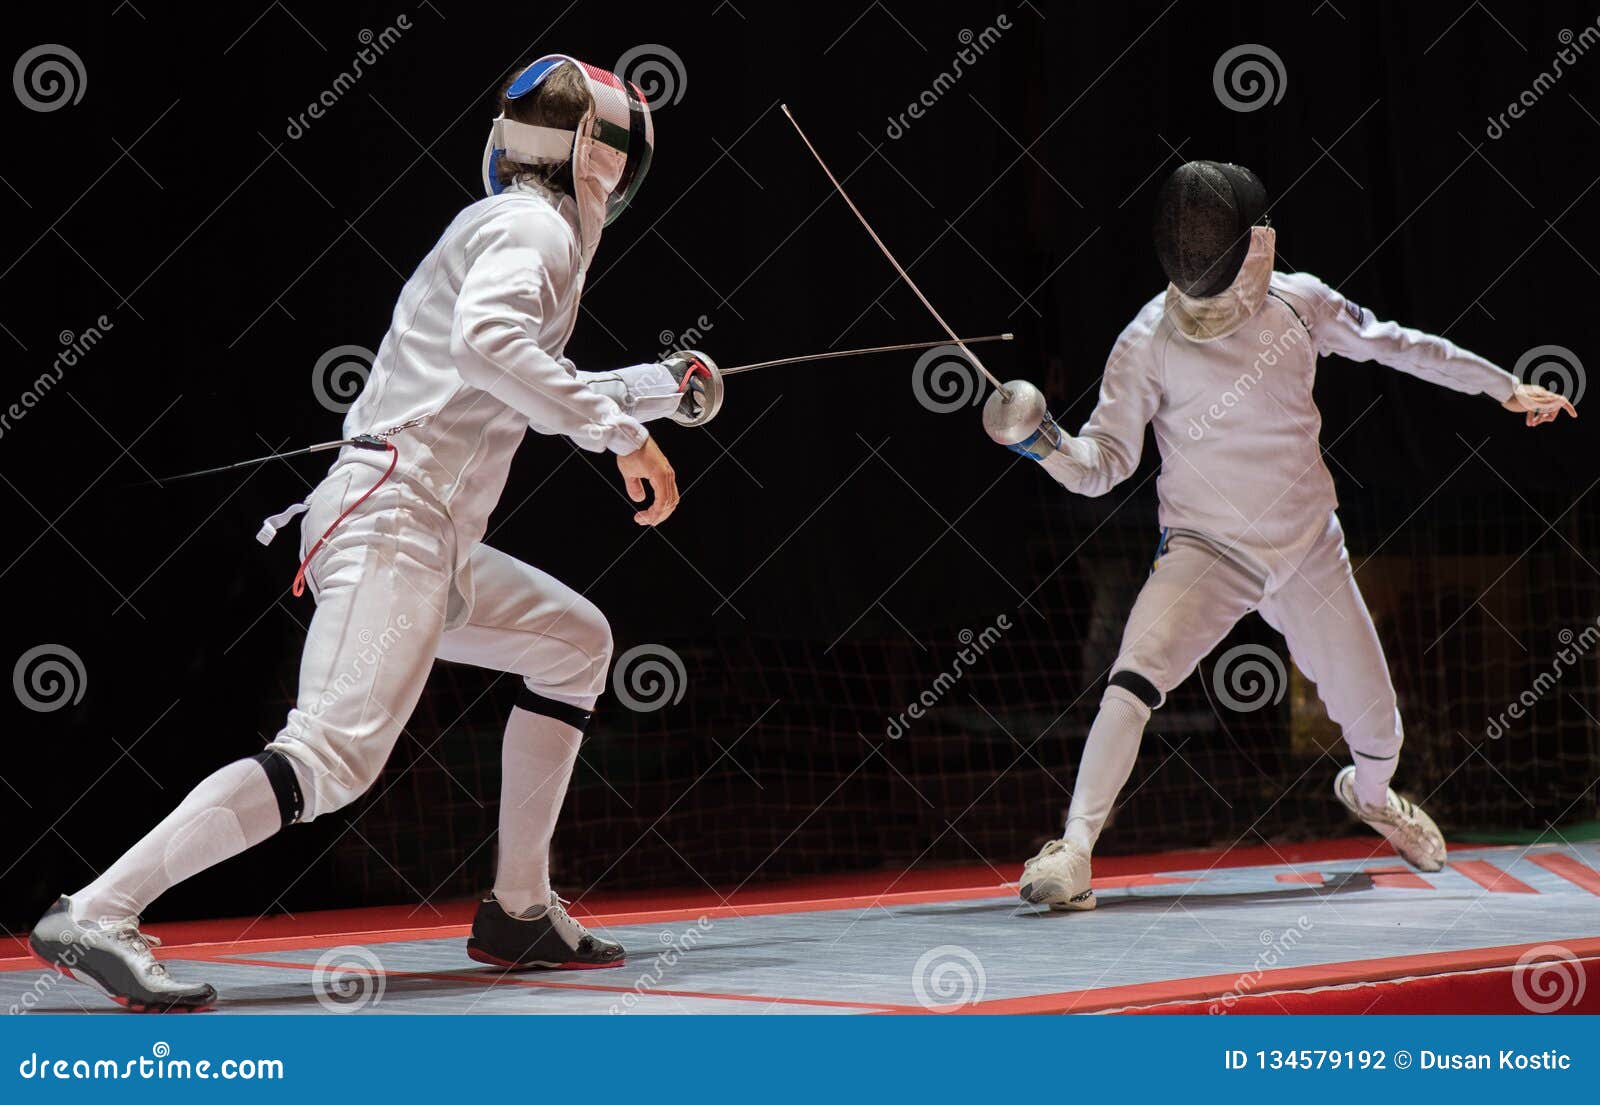 two man fencing athletes fight